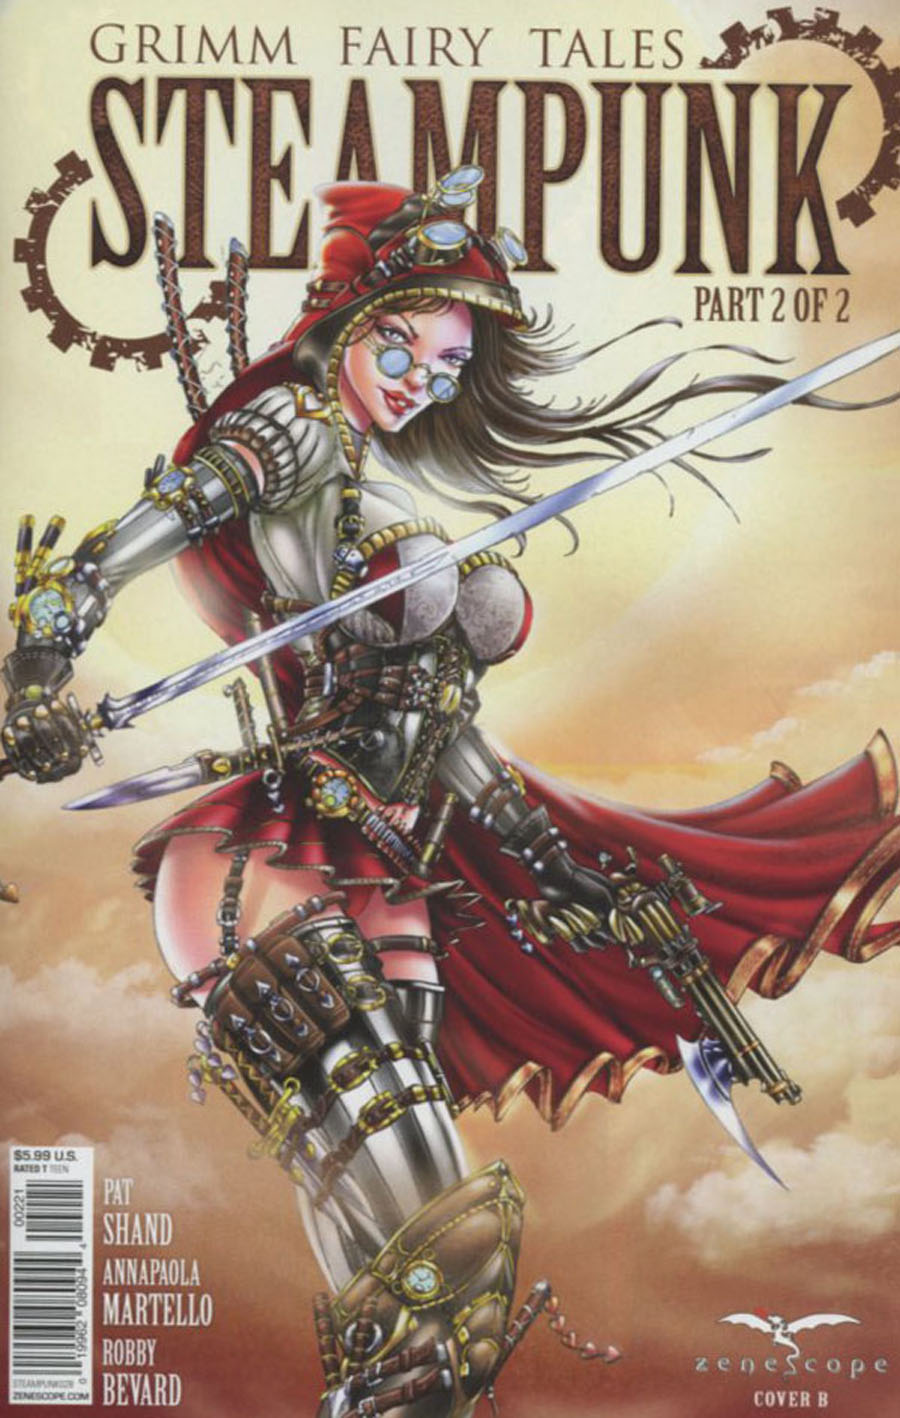 Grimm Fairy Tales Presents Steampunk #2 Cover B Jamie Tyndall